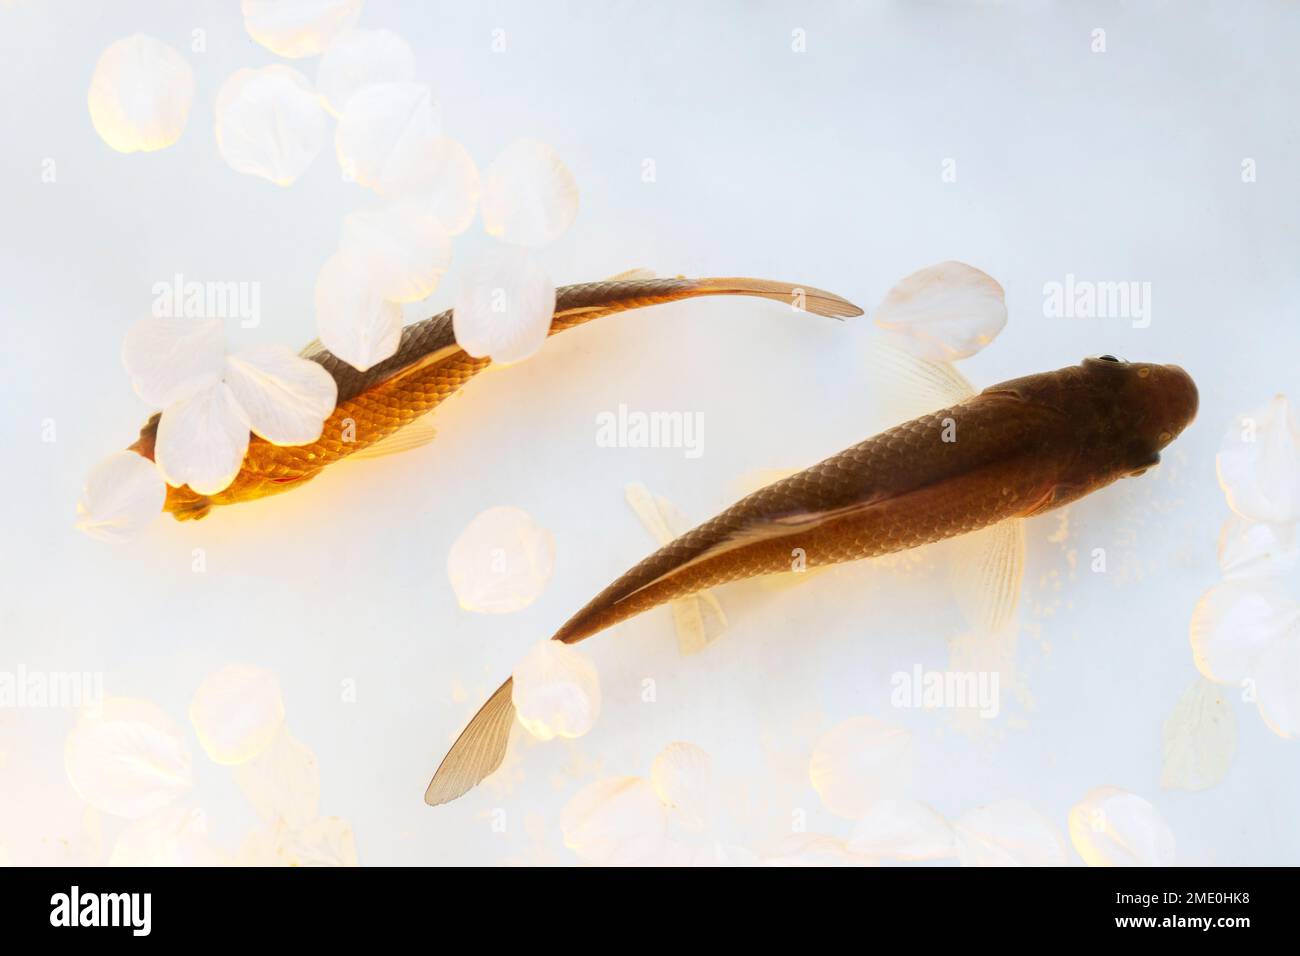 yin yang shaped fish with flower petals around Stock Photo